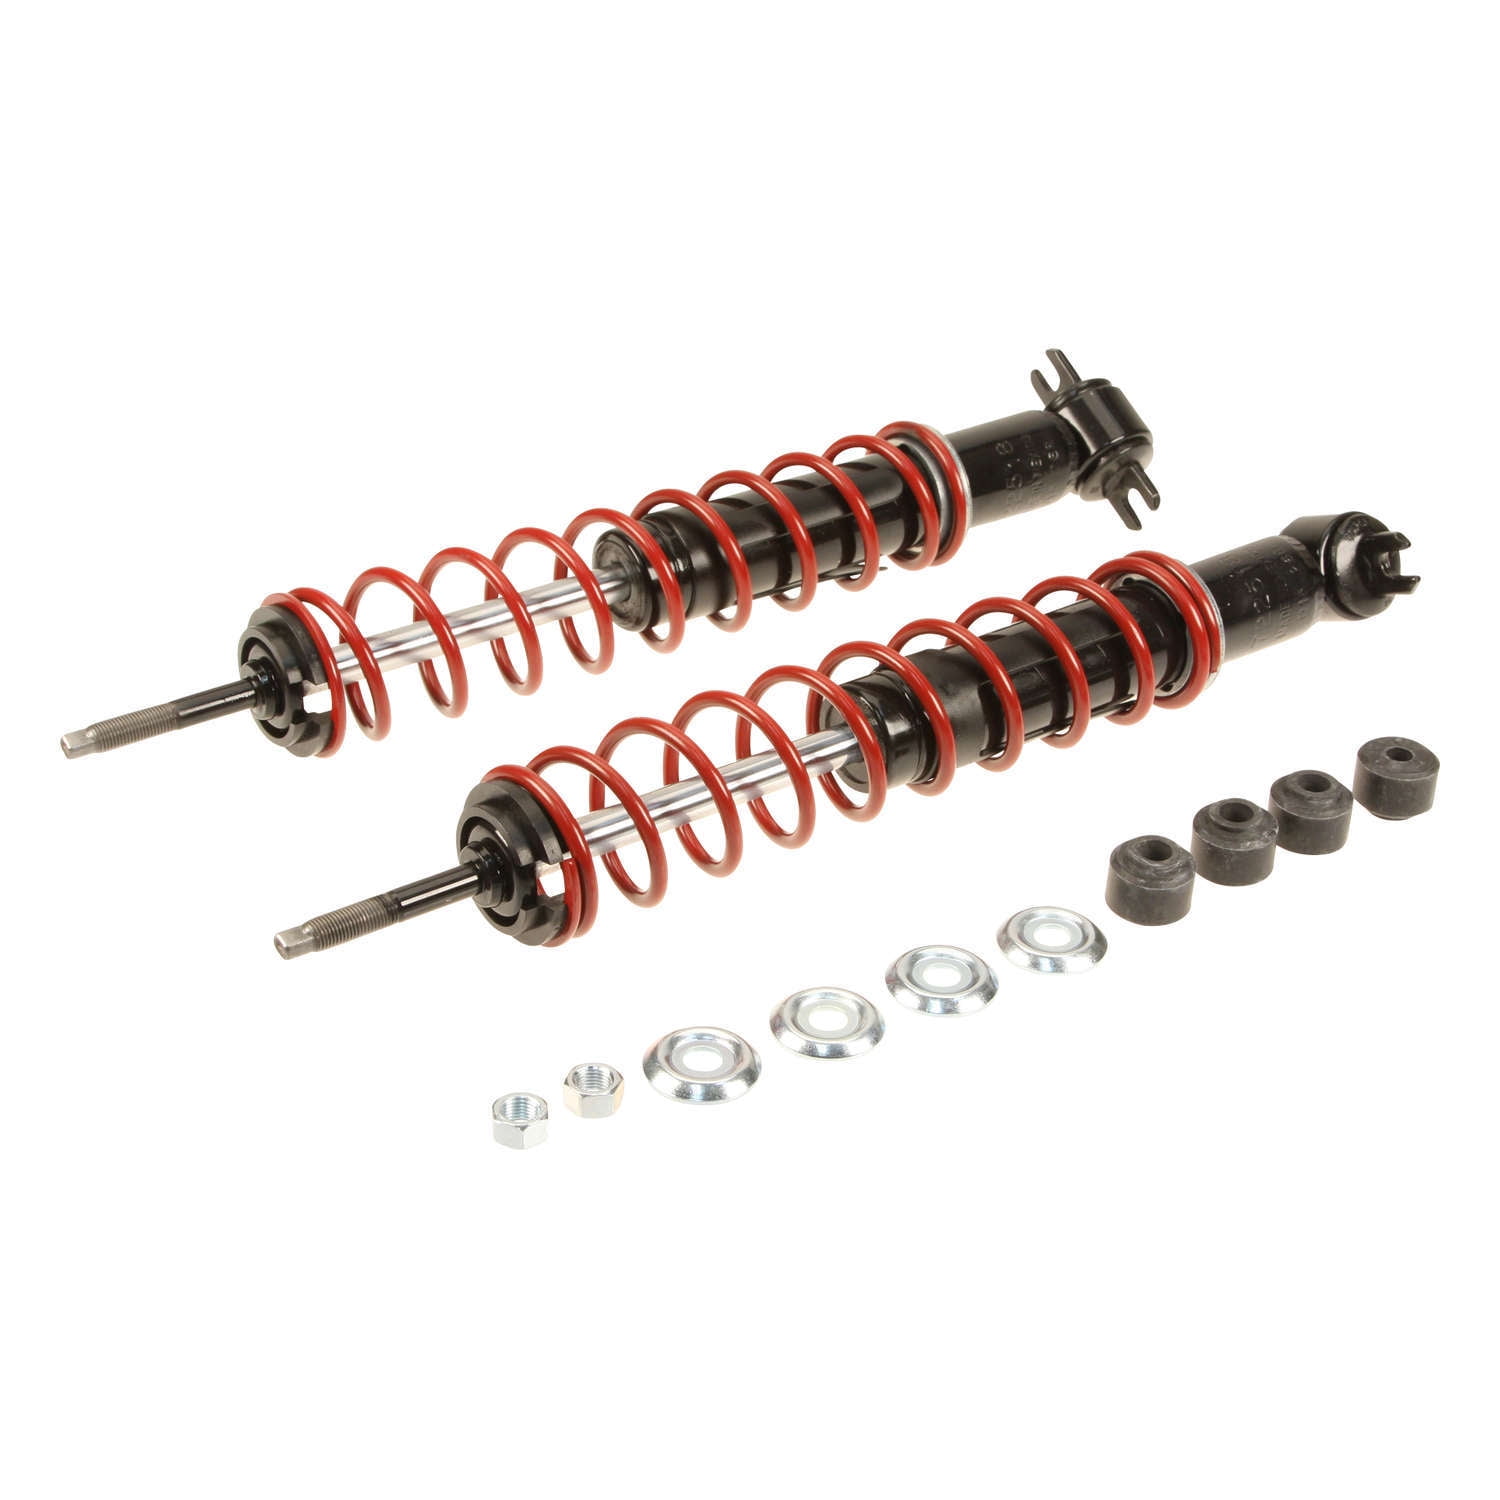 ACDelco Front Shock Absorber Set